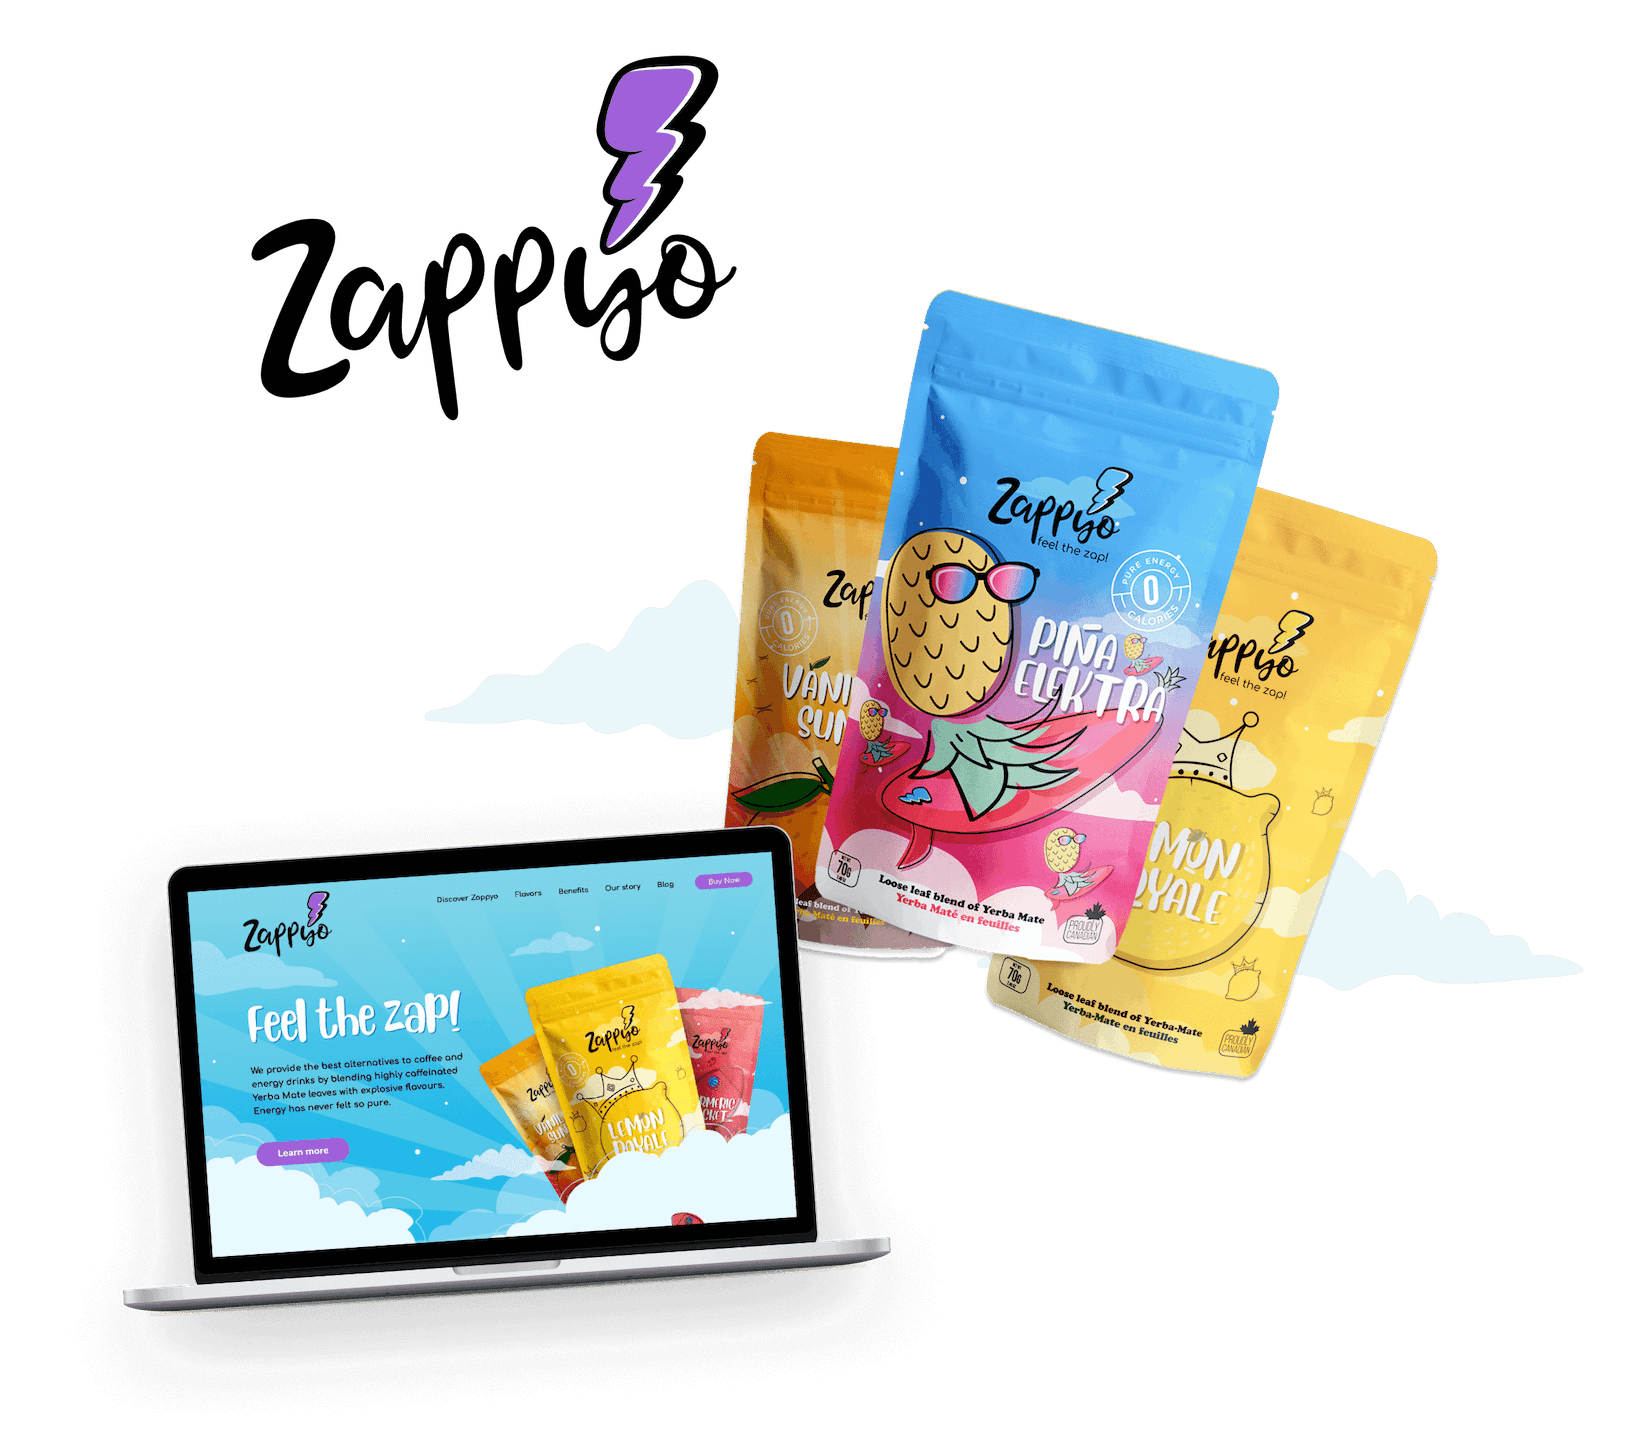 Colorful logo, packaging and website designs for beverage brand Zappyo